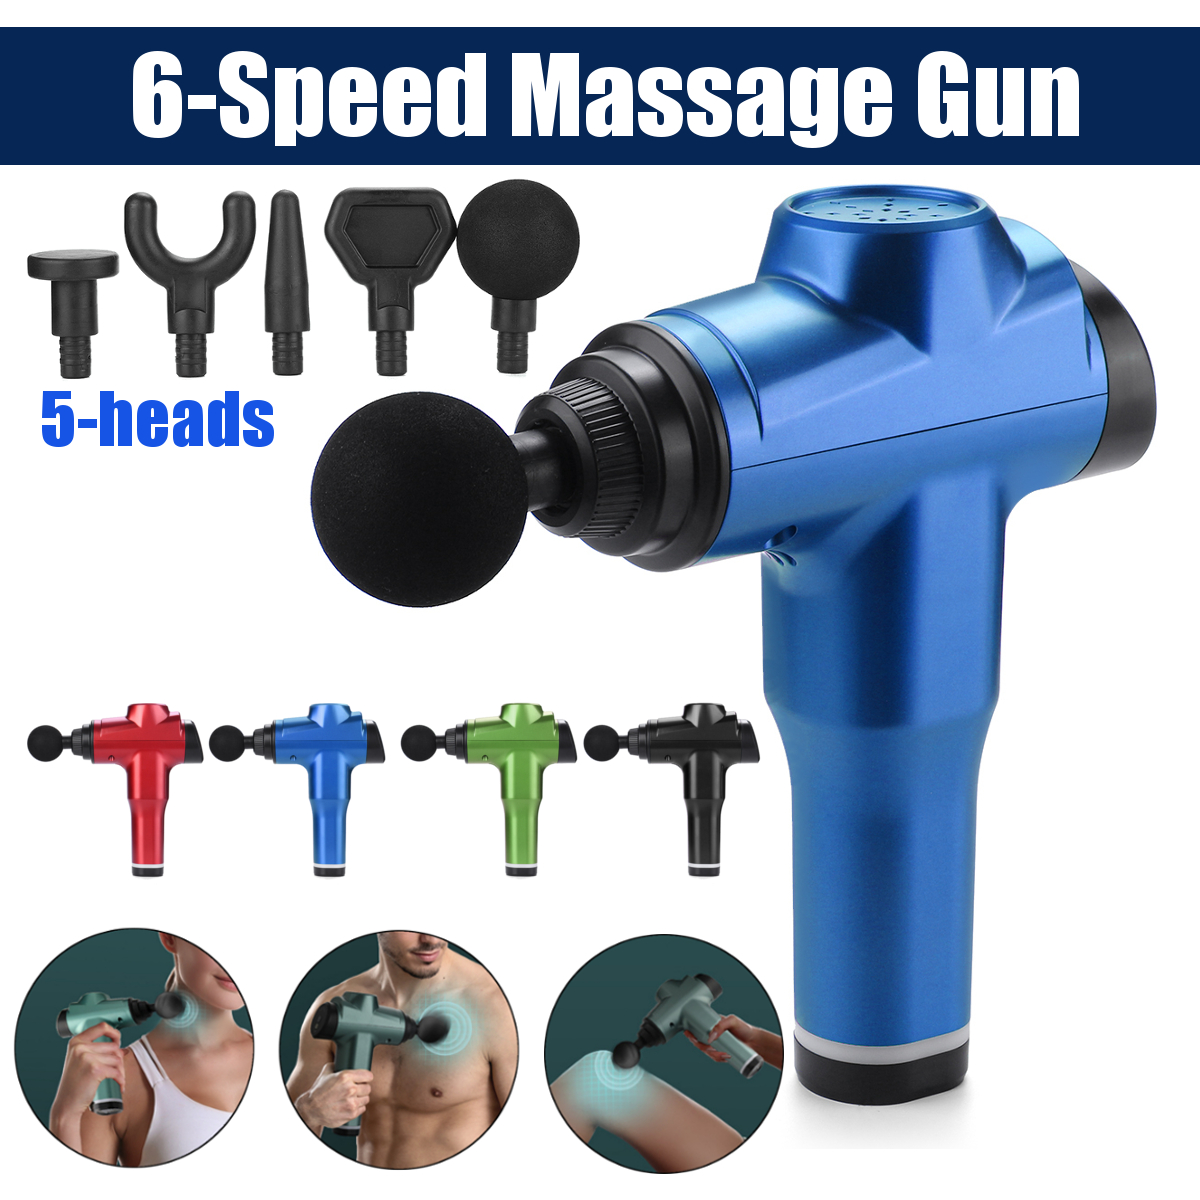 Recahrgable-6-Speed-5-Head-Fascia-Massager-Muscle-Relaxation-Massager-Gym-High-Frequency-Vibration-P-1679196-2